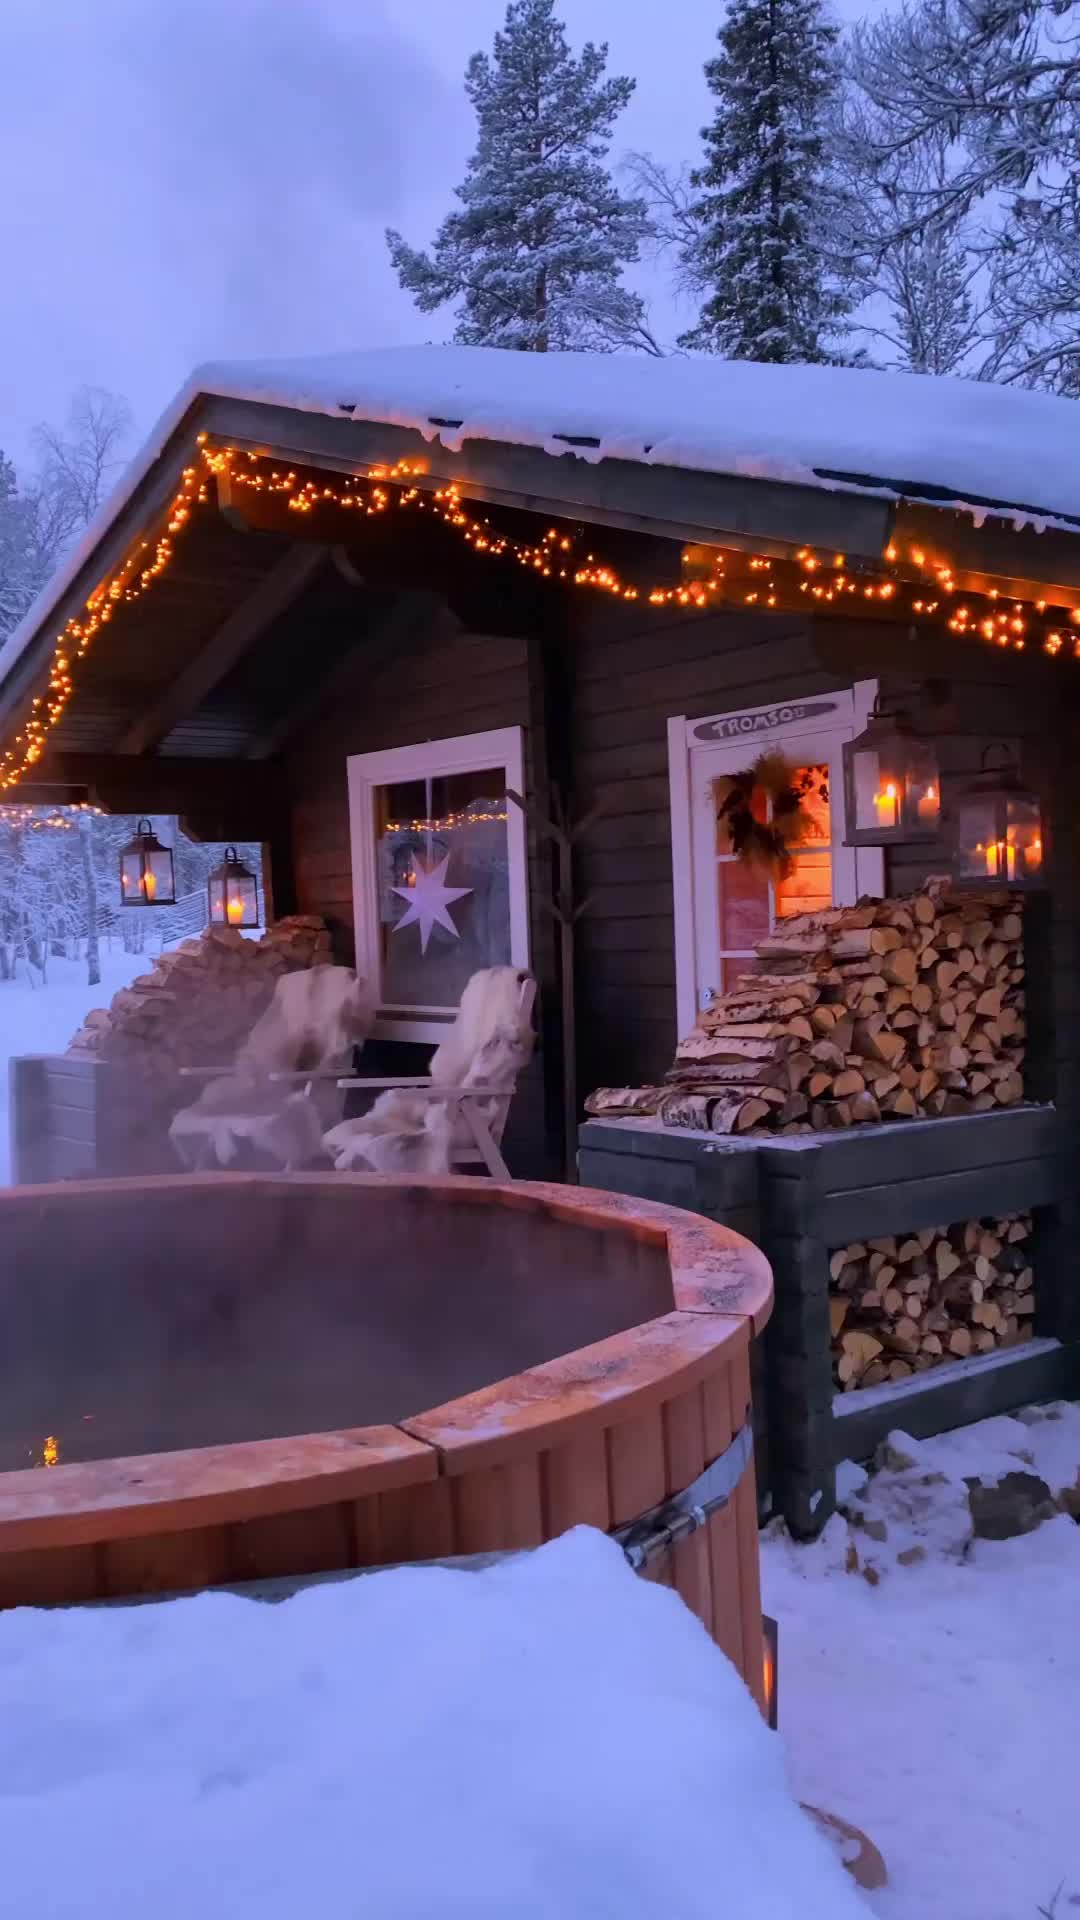 Luxury Guesthouse in Arctic Finnish Lapland - Foxfires